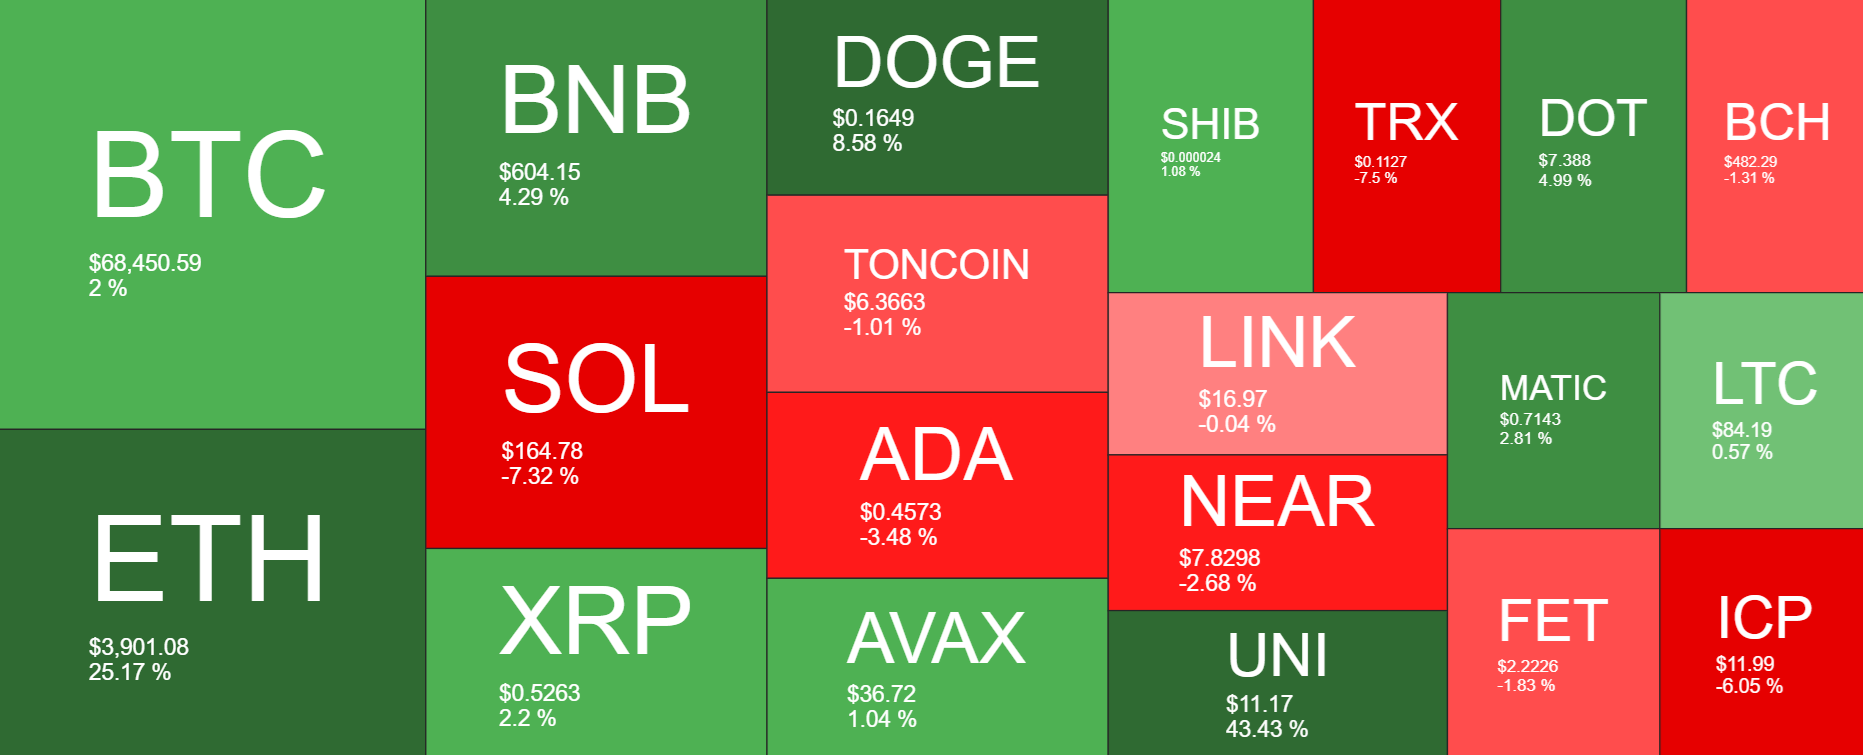 Market research report: Bitcoin sees modest gains, ETH surges on ETF approval, US stocks hit ATHs - bitcoin heatmap 1